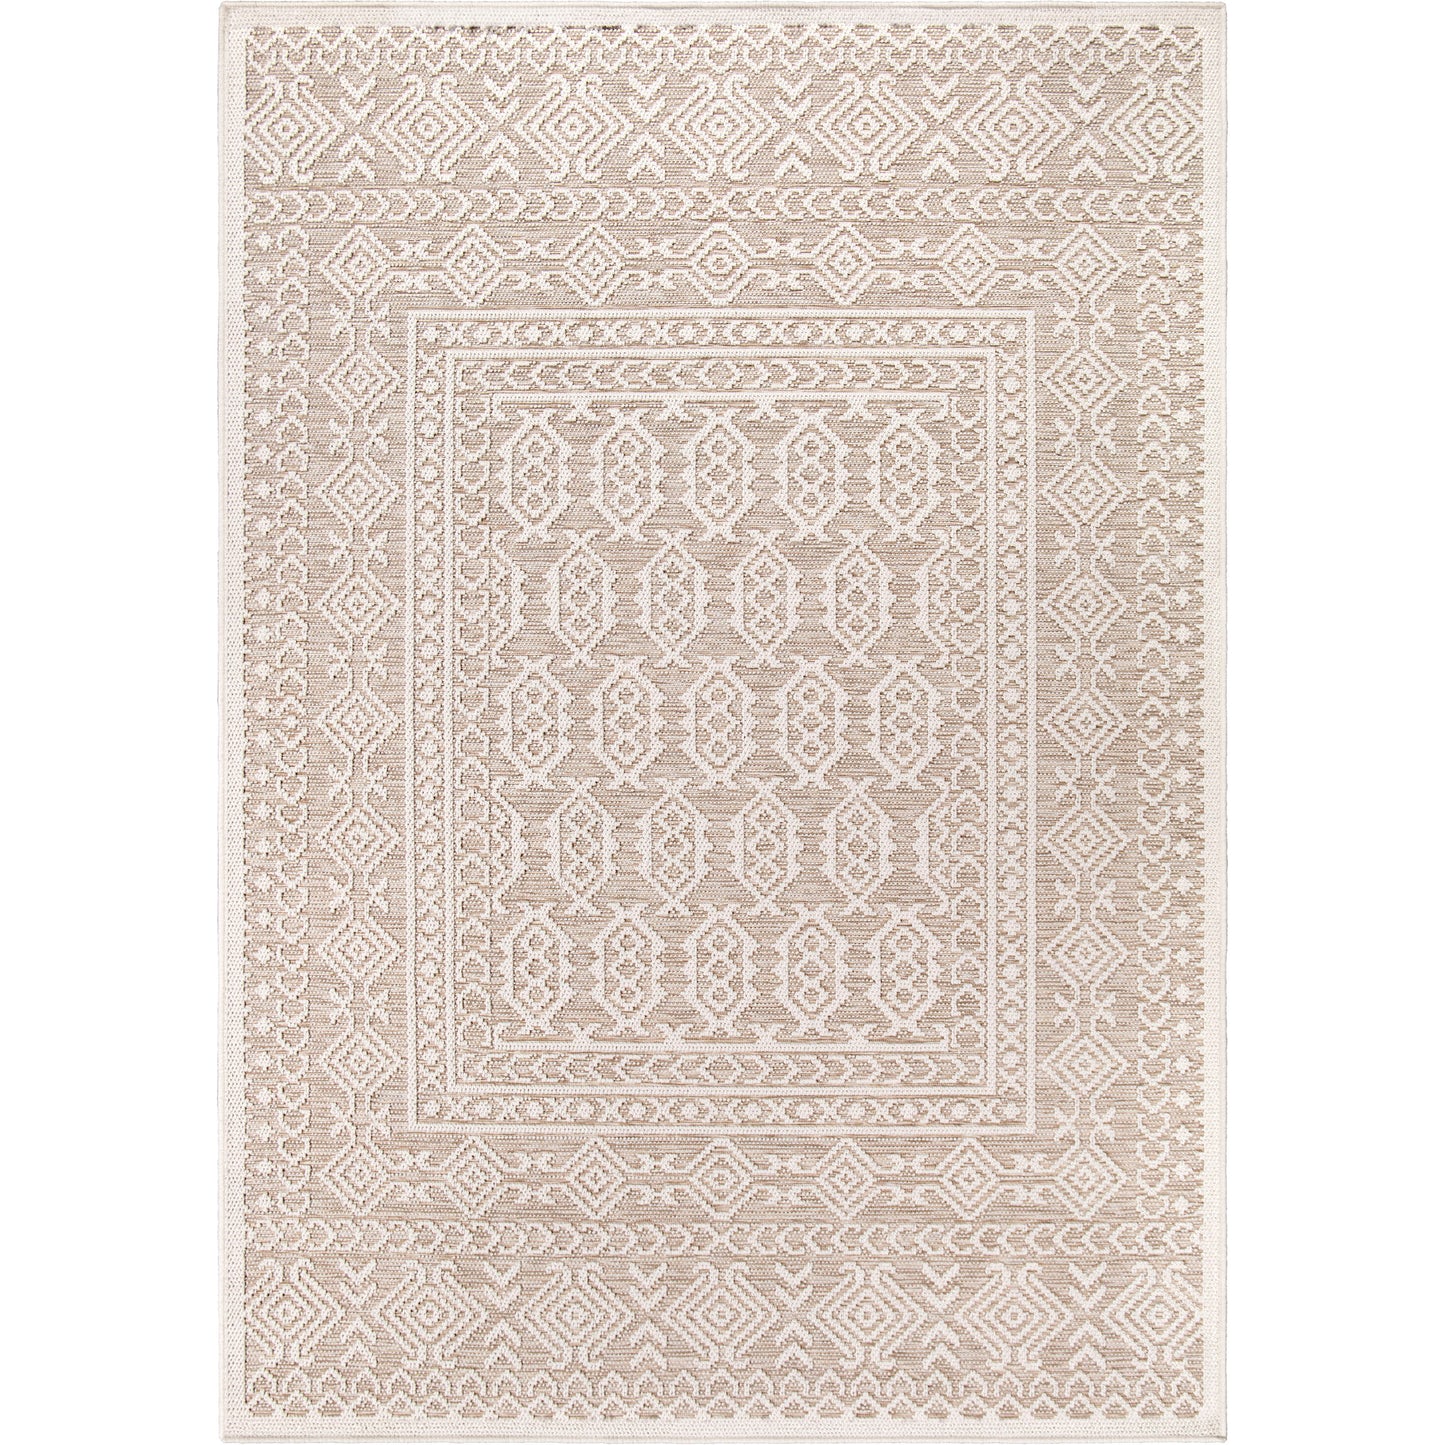 Orian Rugs Knitweave Manrova KNW/MANR Natural Driftwood Area Rug